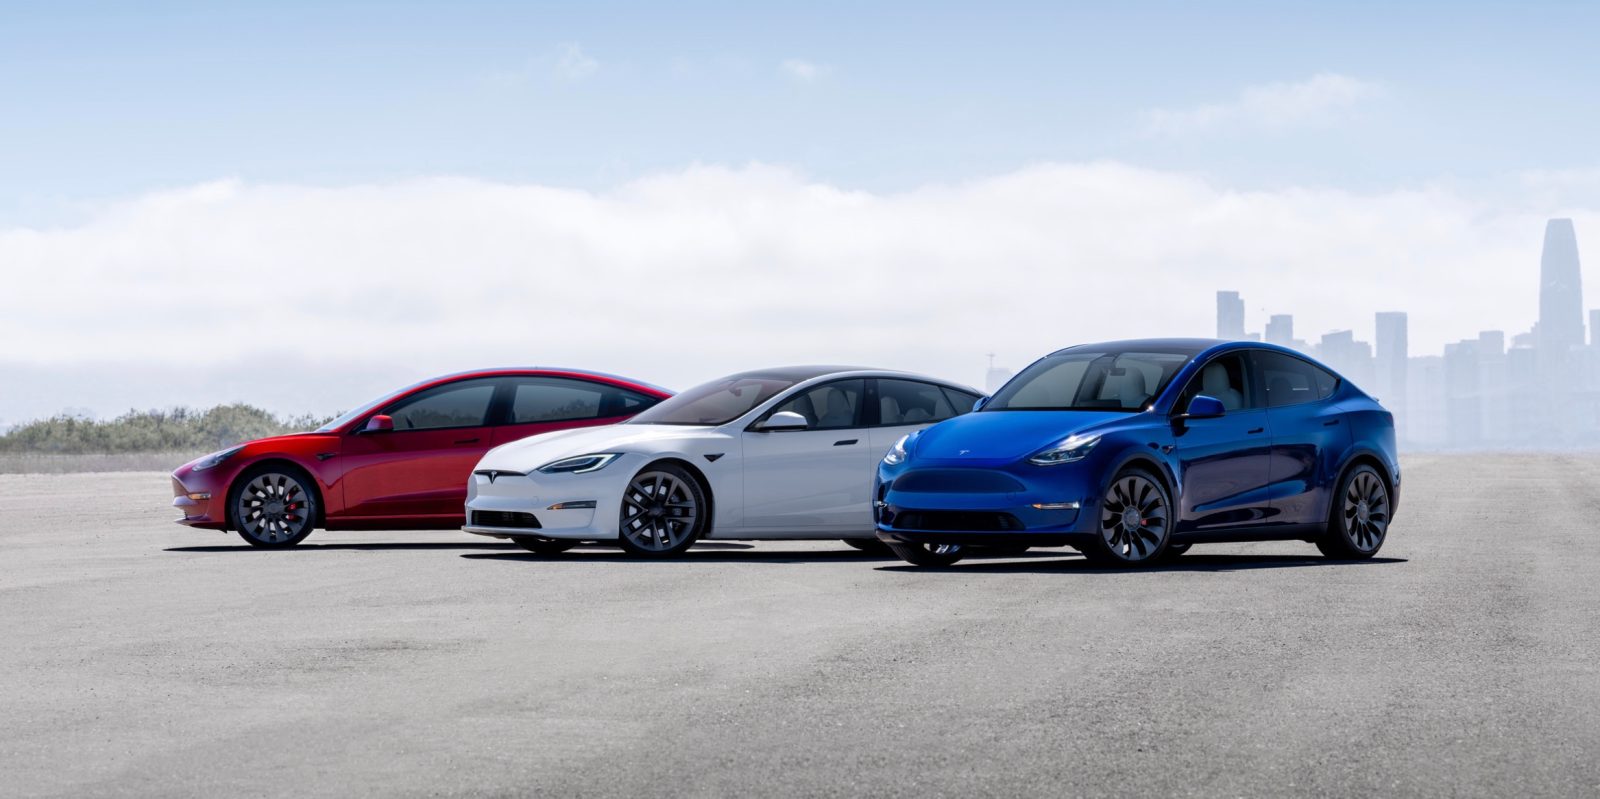 Tesla (TSLA) crushes expectations with deliveries of 466,000 electric cars